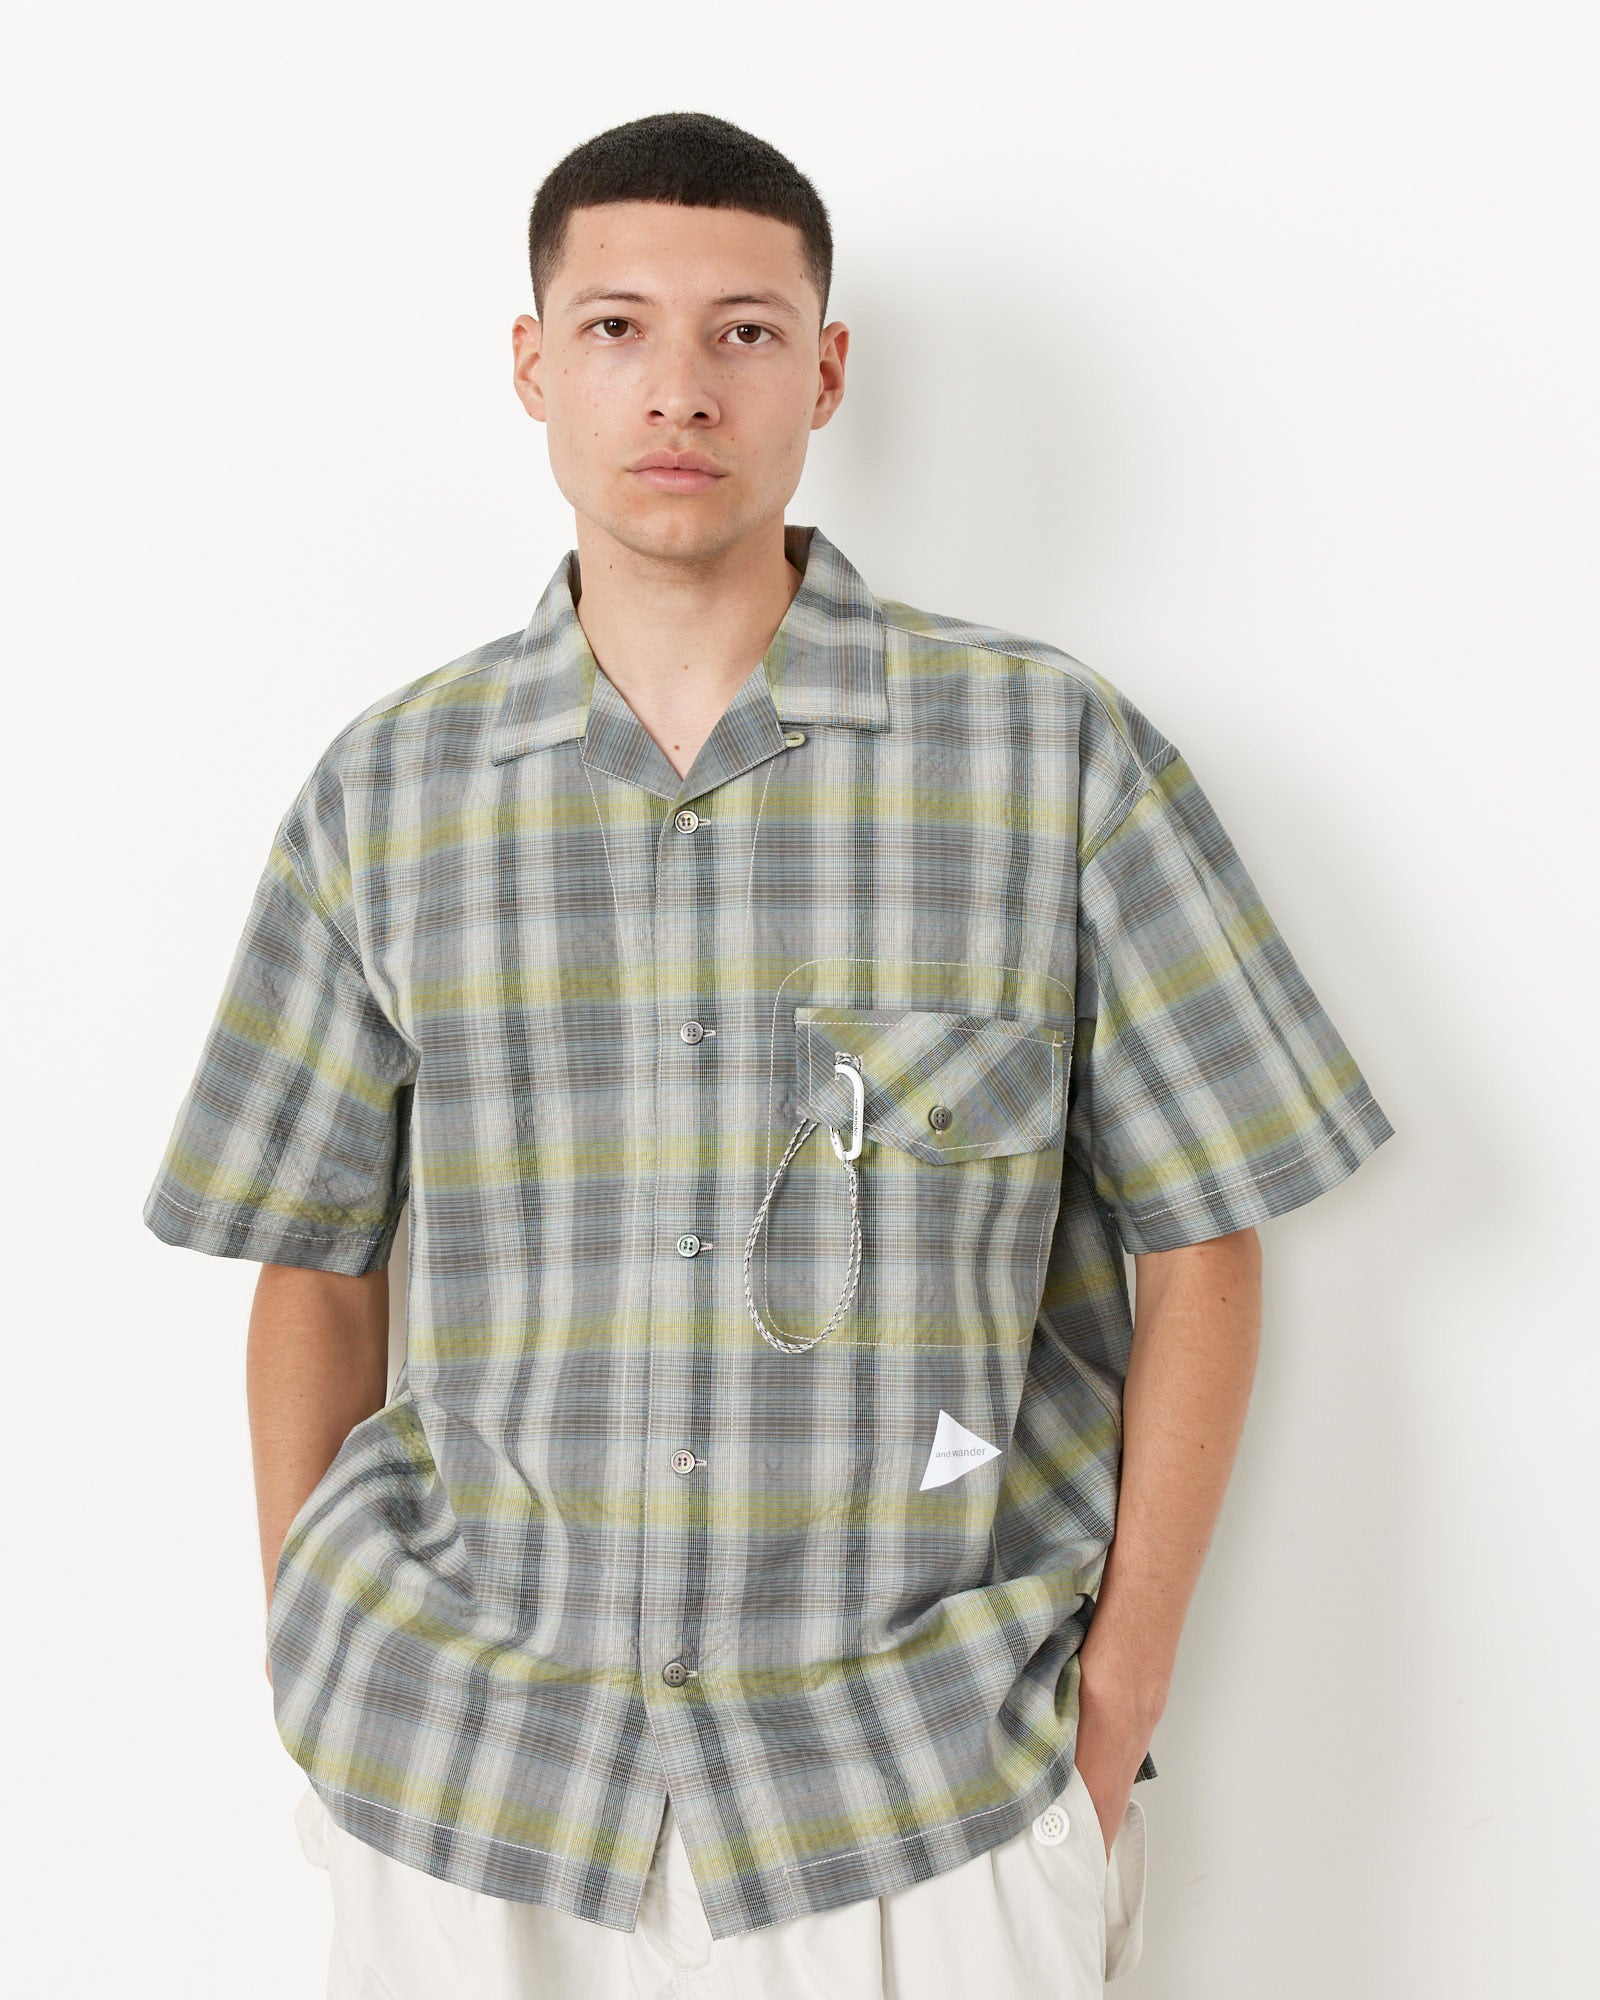 Dry Check Open Shirt in Grey